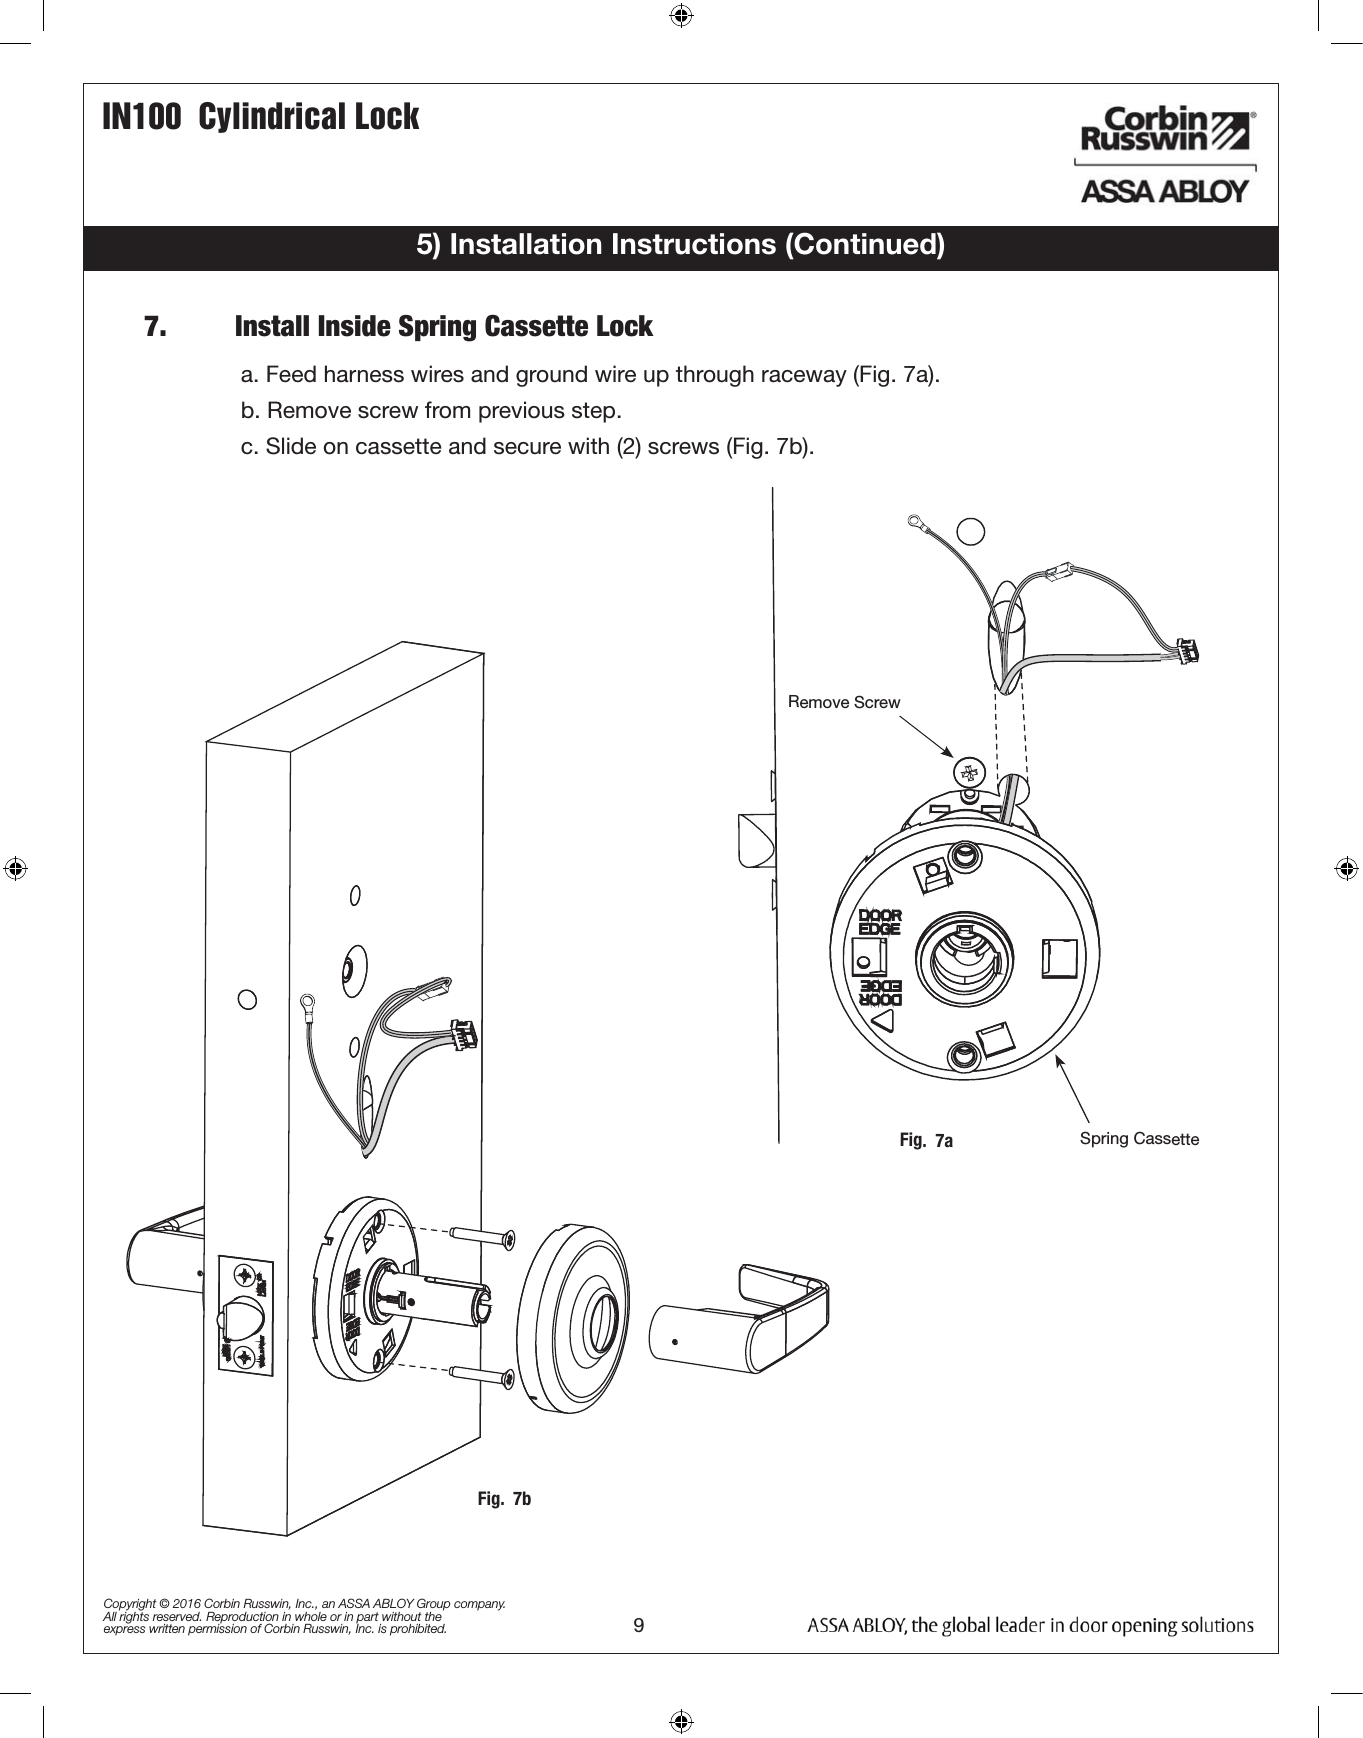 IN100  Cylindrical Lock9Copyright © 2016 Corbin Russwin, Inc., an ASSA ABLOY Group company. All rights reserved. Reproduction in whole or in part without the express written permission of Corbin Russwin, Inc. is prohibited.7.         Install Inside Spring Cassette Lock5) Installation Instructions (Continued)a. Feed harness wires and ground wire up through raceway (Fig. 7a).b. Remove screw from previous step.c. Slide on cassette and secure with (2) screws (Fig. 7b).Fig.  7a Spring CassetteRemove ScrewFig.  7b